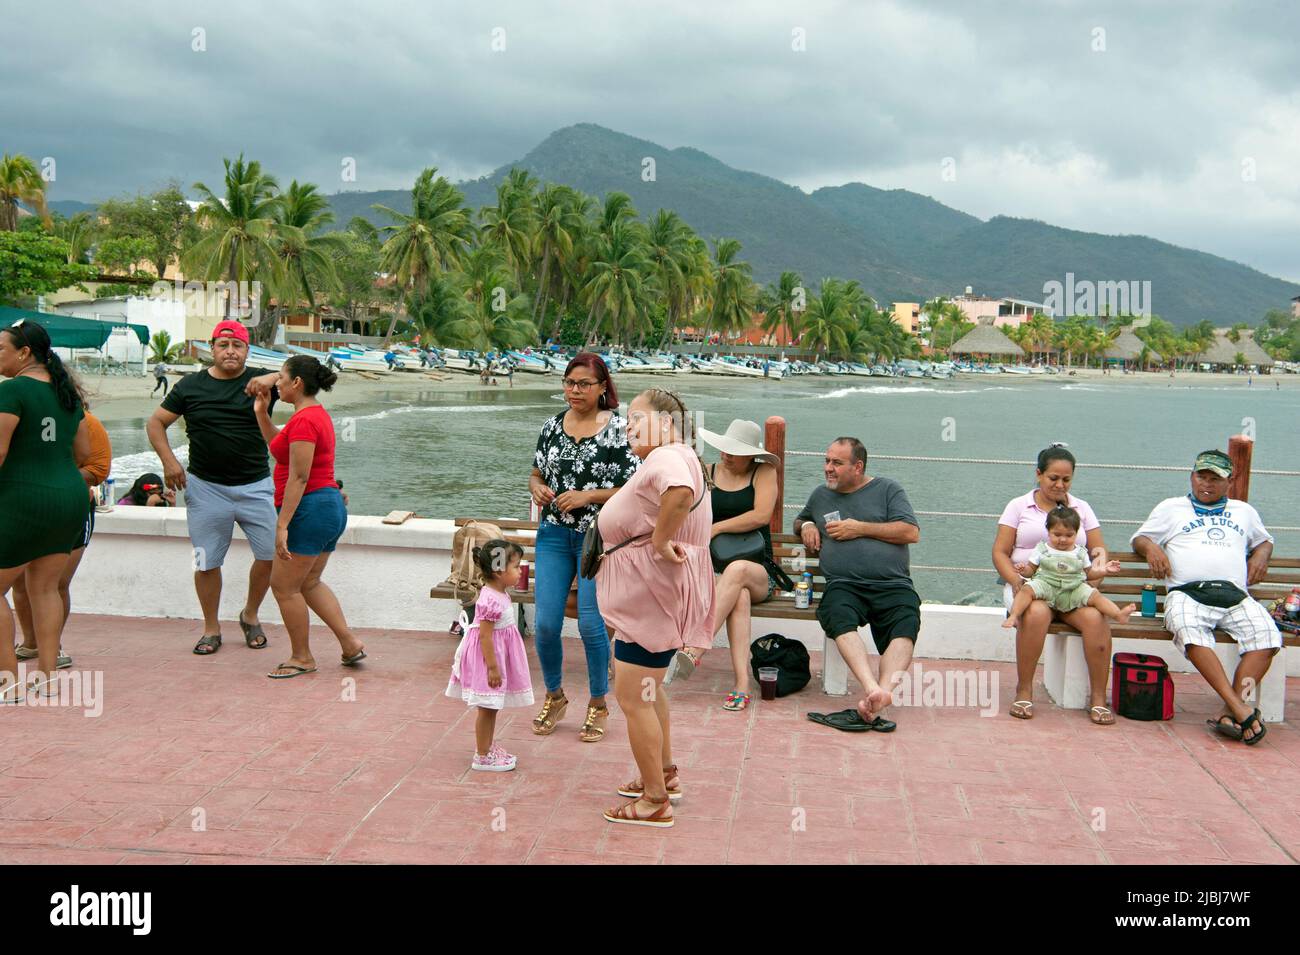 People on pier listening to live music overlooking scenic view of beach with fishing boats in Zihuatanejo, Mexico Stock Photo